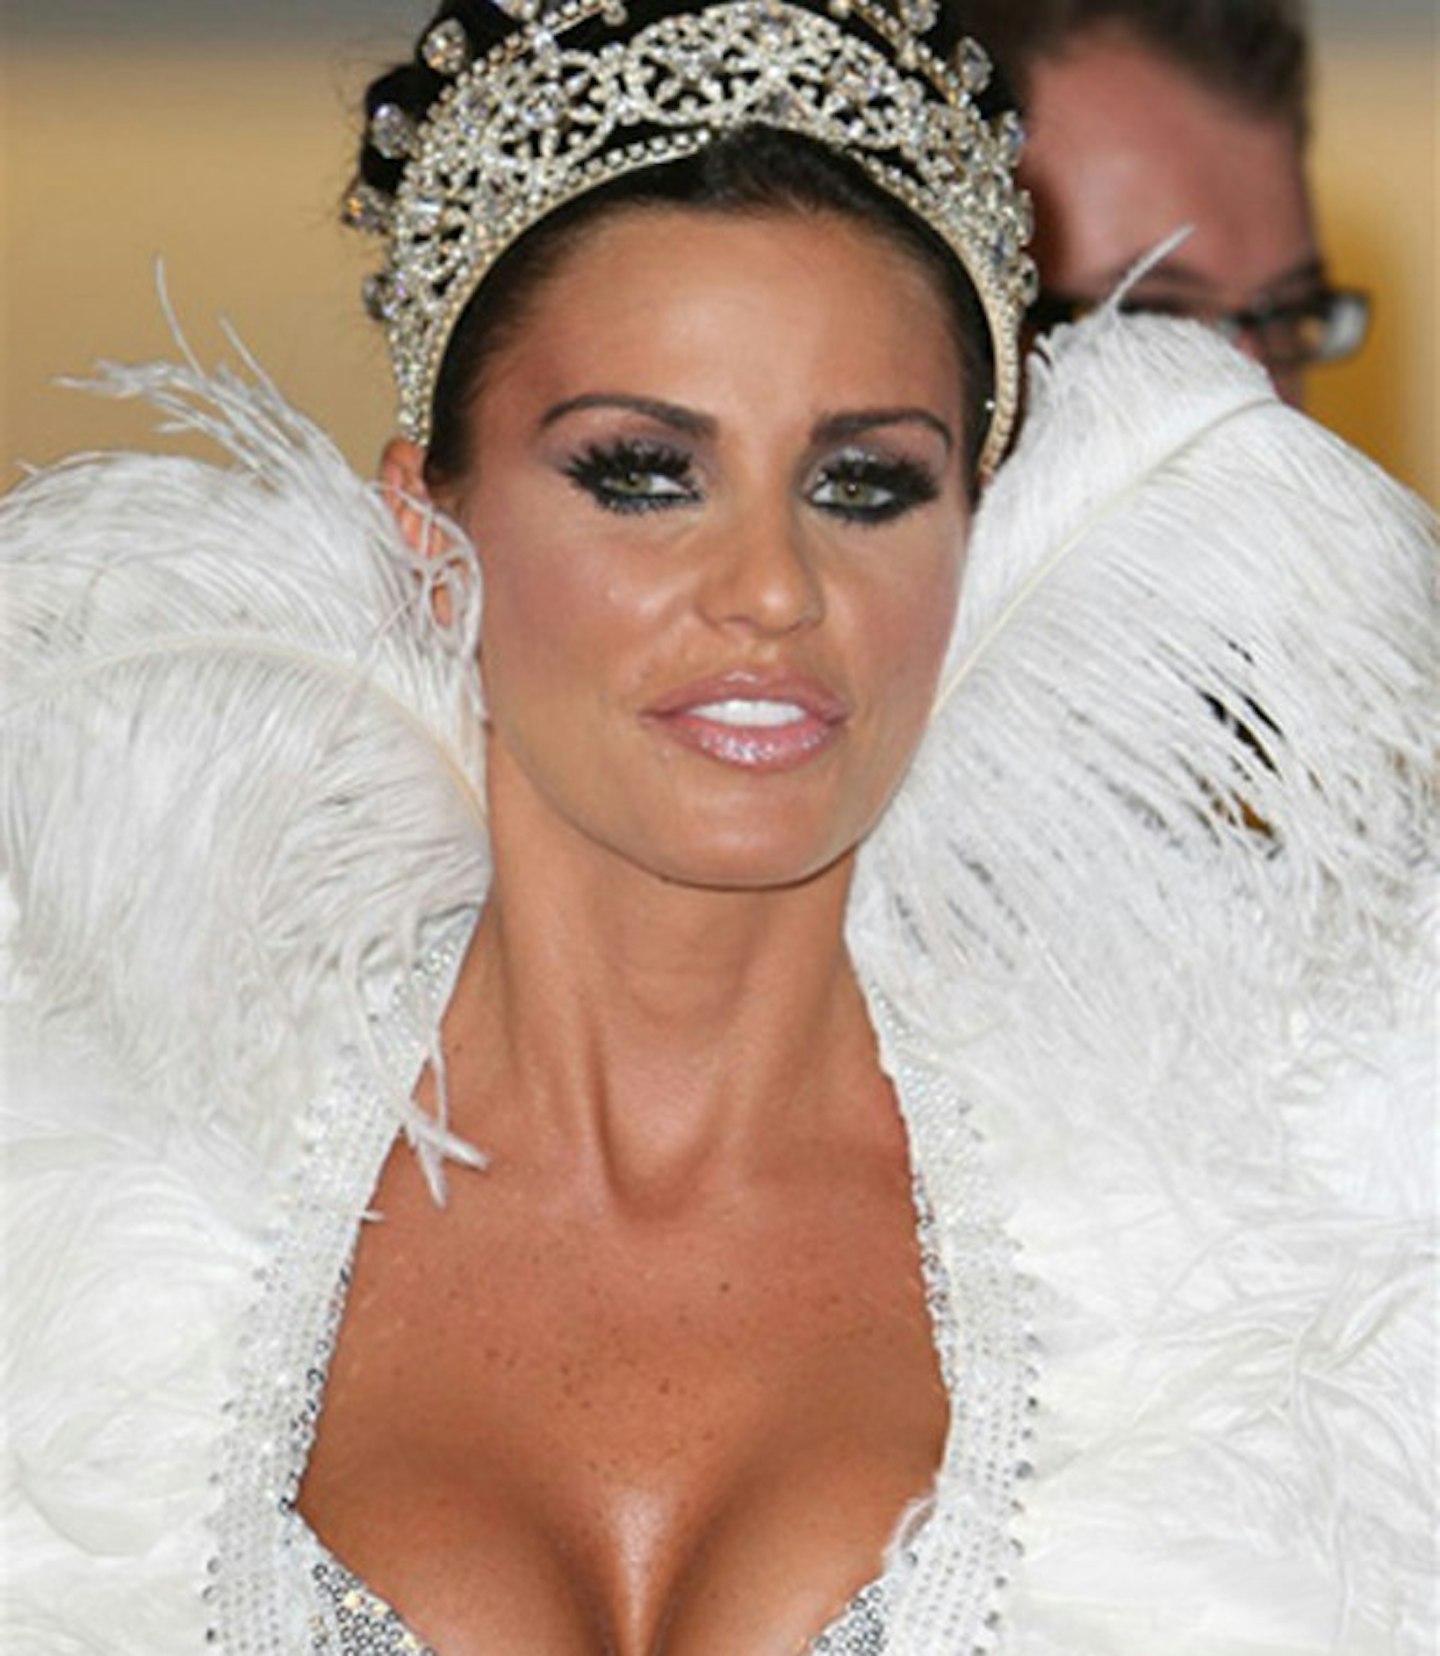 Katie Price: 17th July 2008